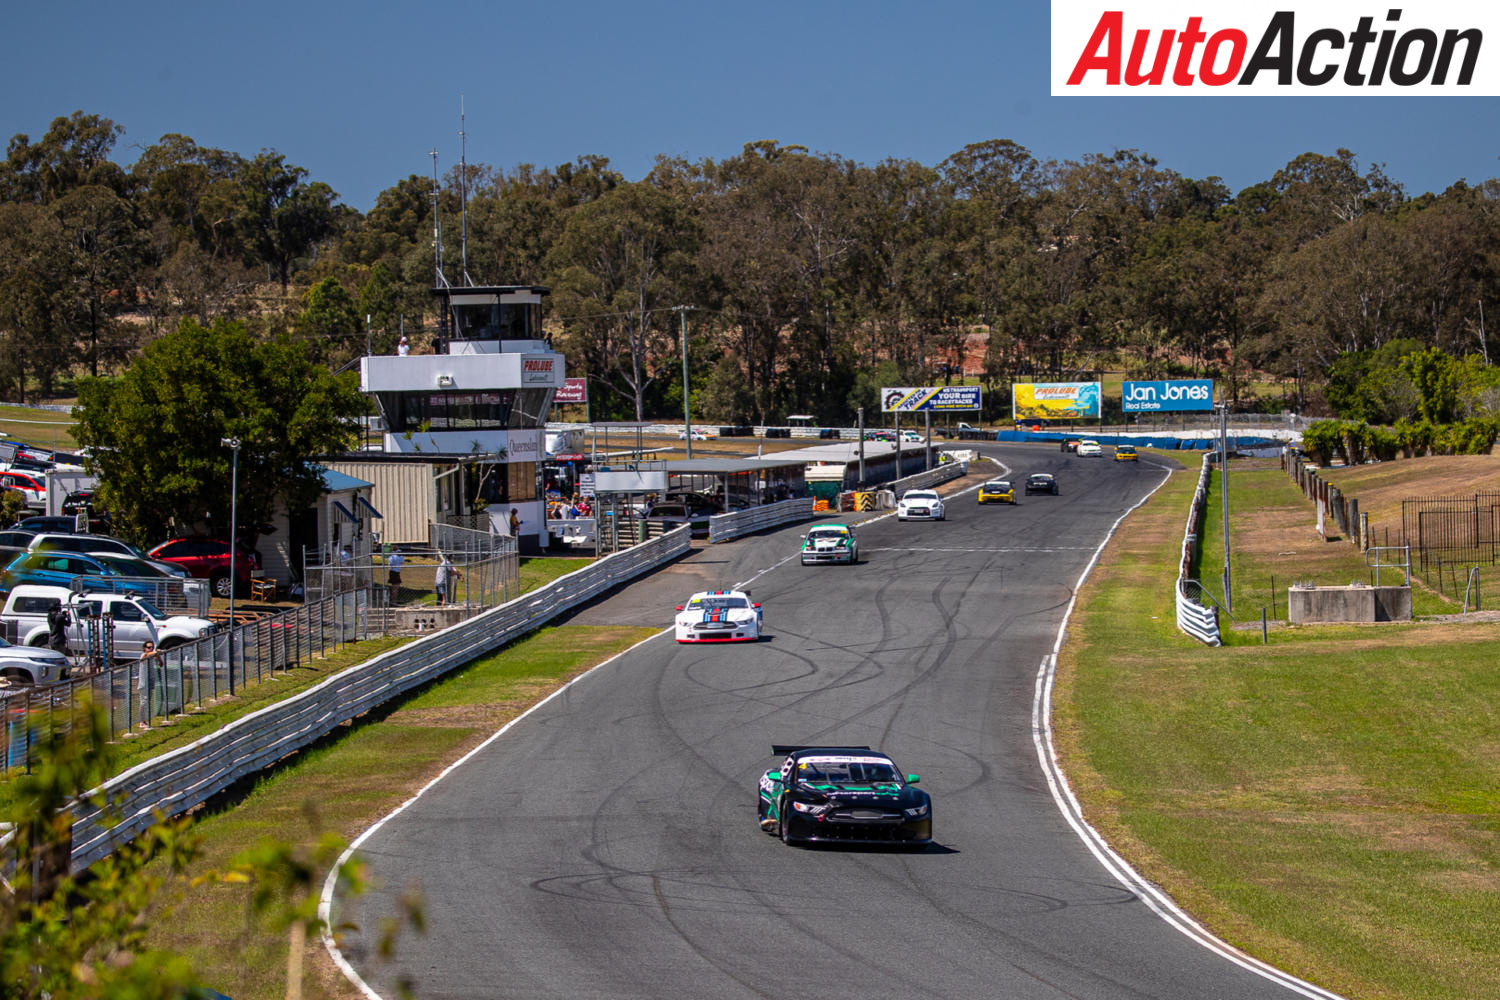 Queensland Raceway stops running events at Lakeside - Image: InSyde Media